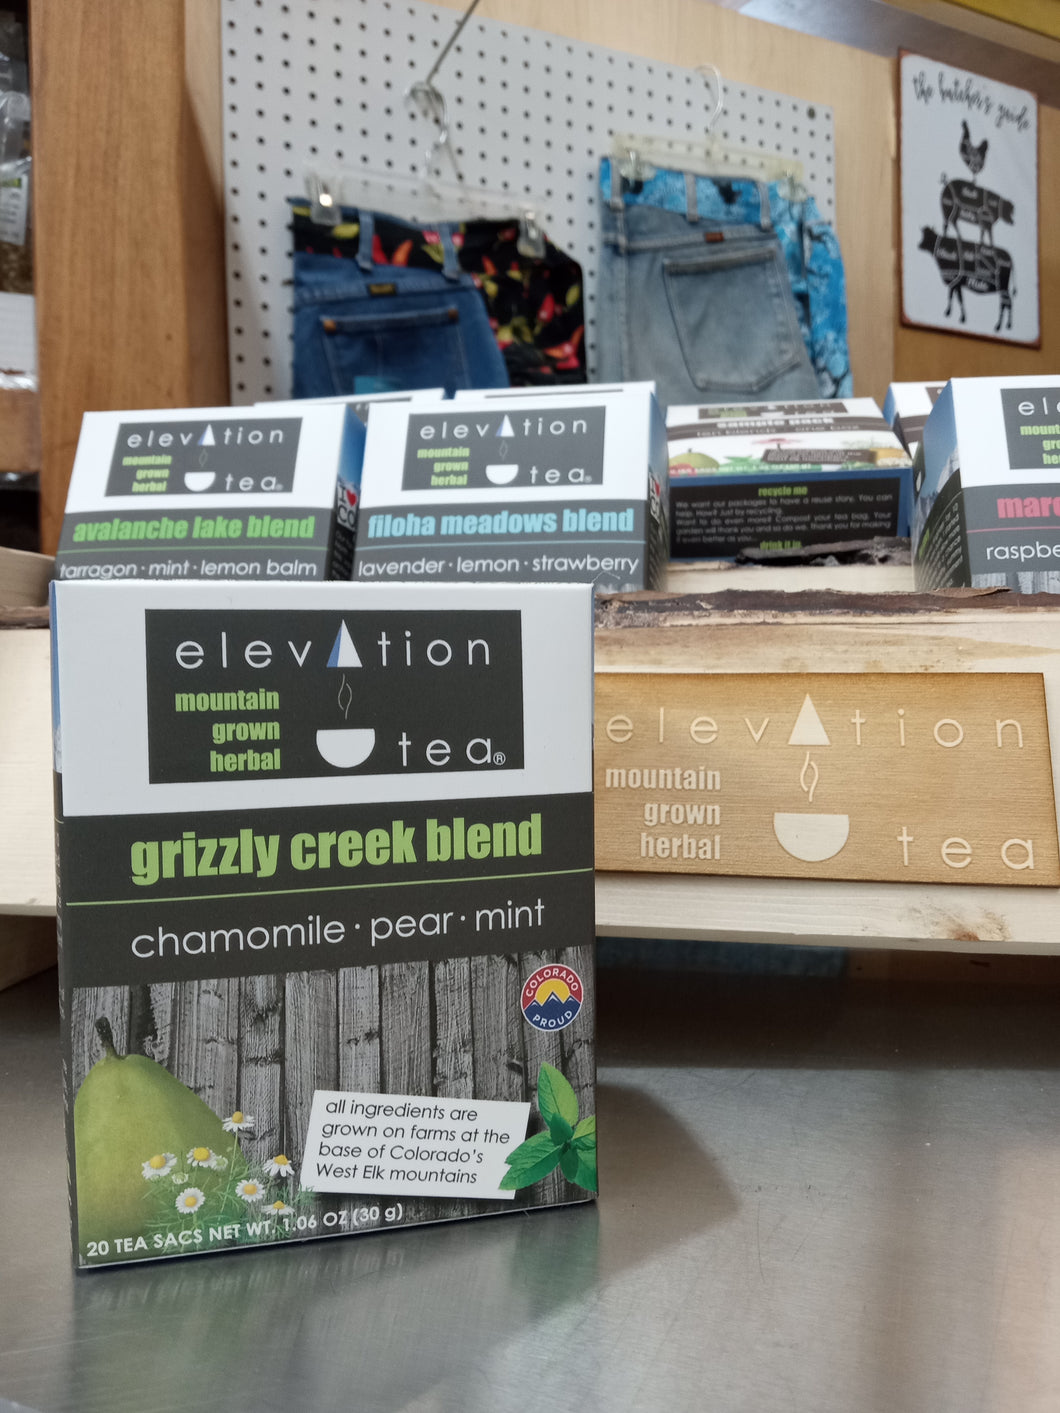 Elevation Mountain Grown Herbal Tea Company: Grizzly Creek Blend